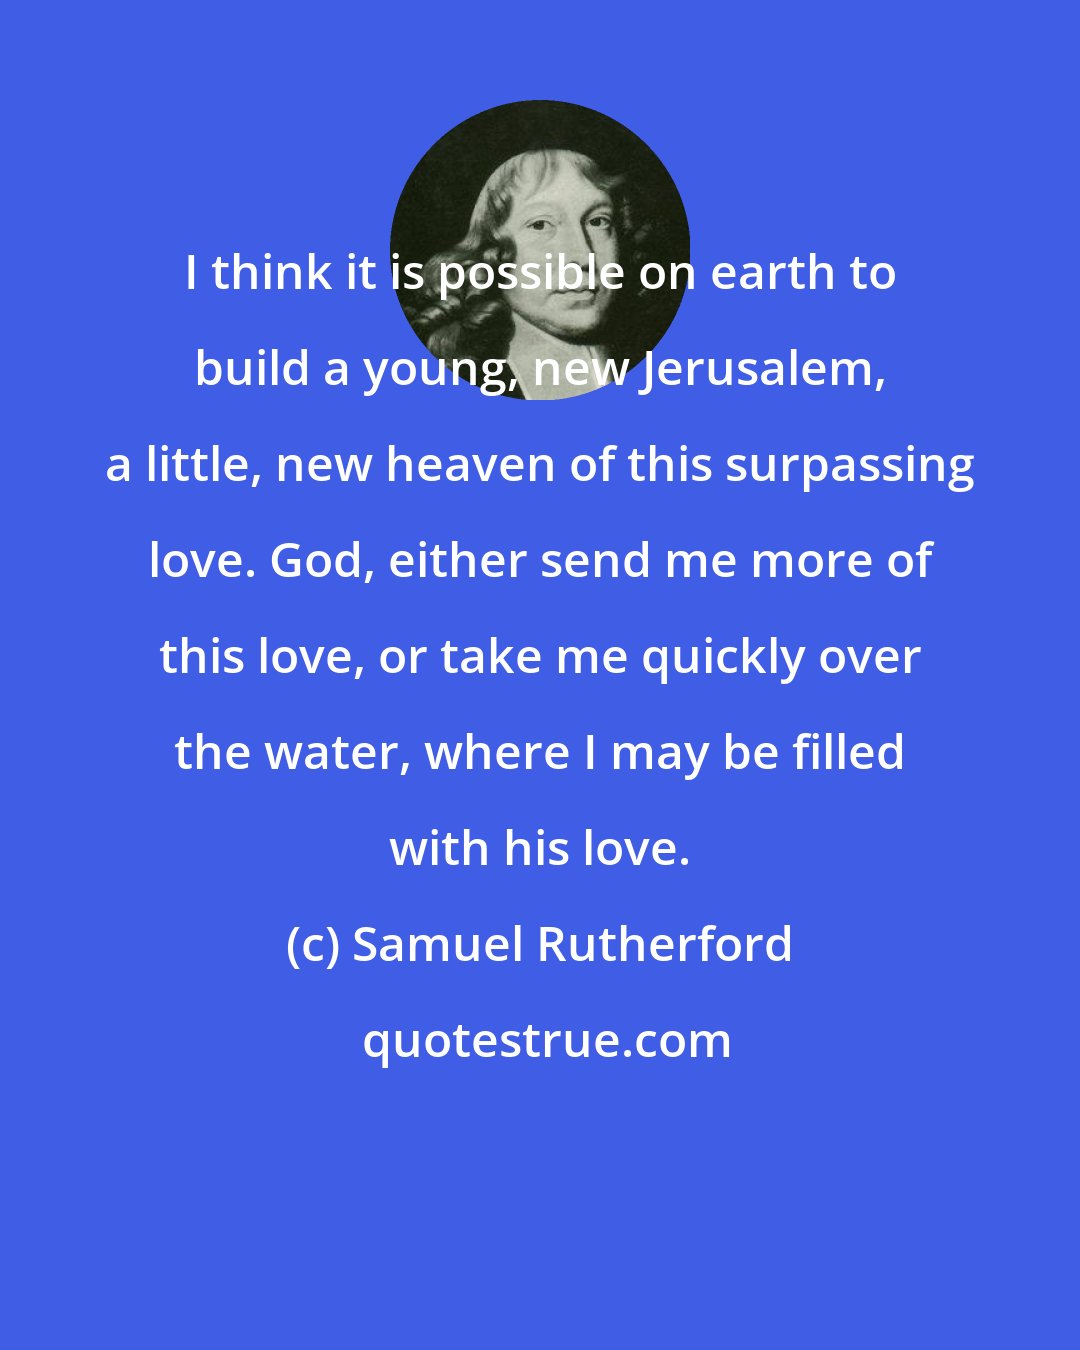 Samuel Rutherford: I think it is possible on earth to build a young, new Jerusalem, a little, new heaven of this surpassing love. God, either send me more of this love, or take me quickly over the water, where I may be filled with his love.